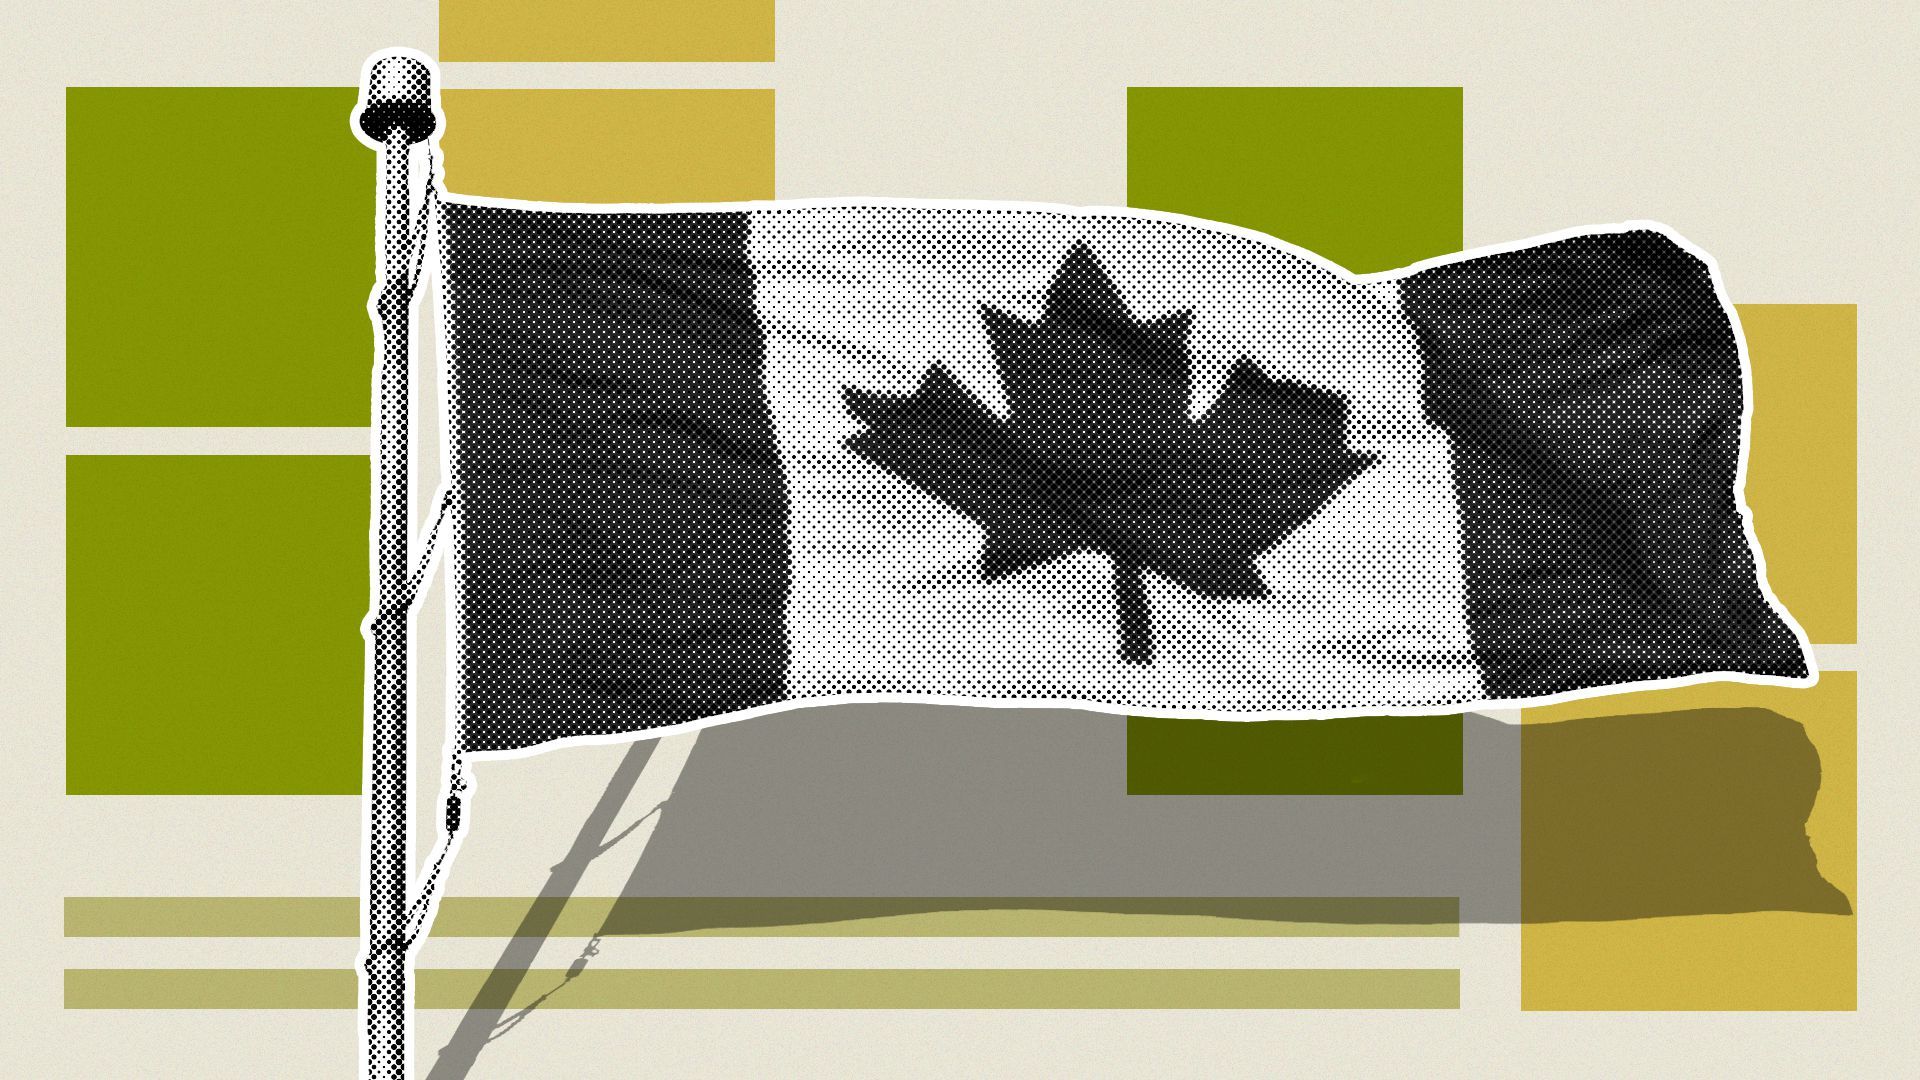 Illustration of a Canadian flag on a field of squares and rectangles